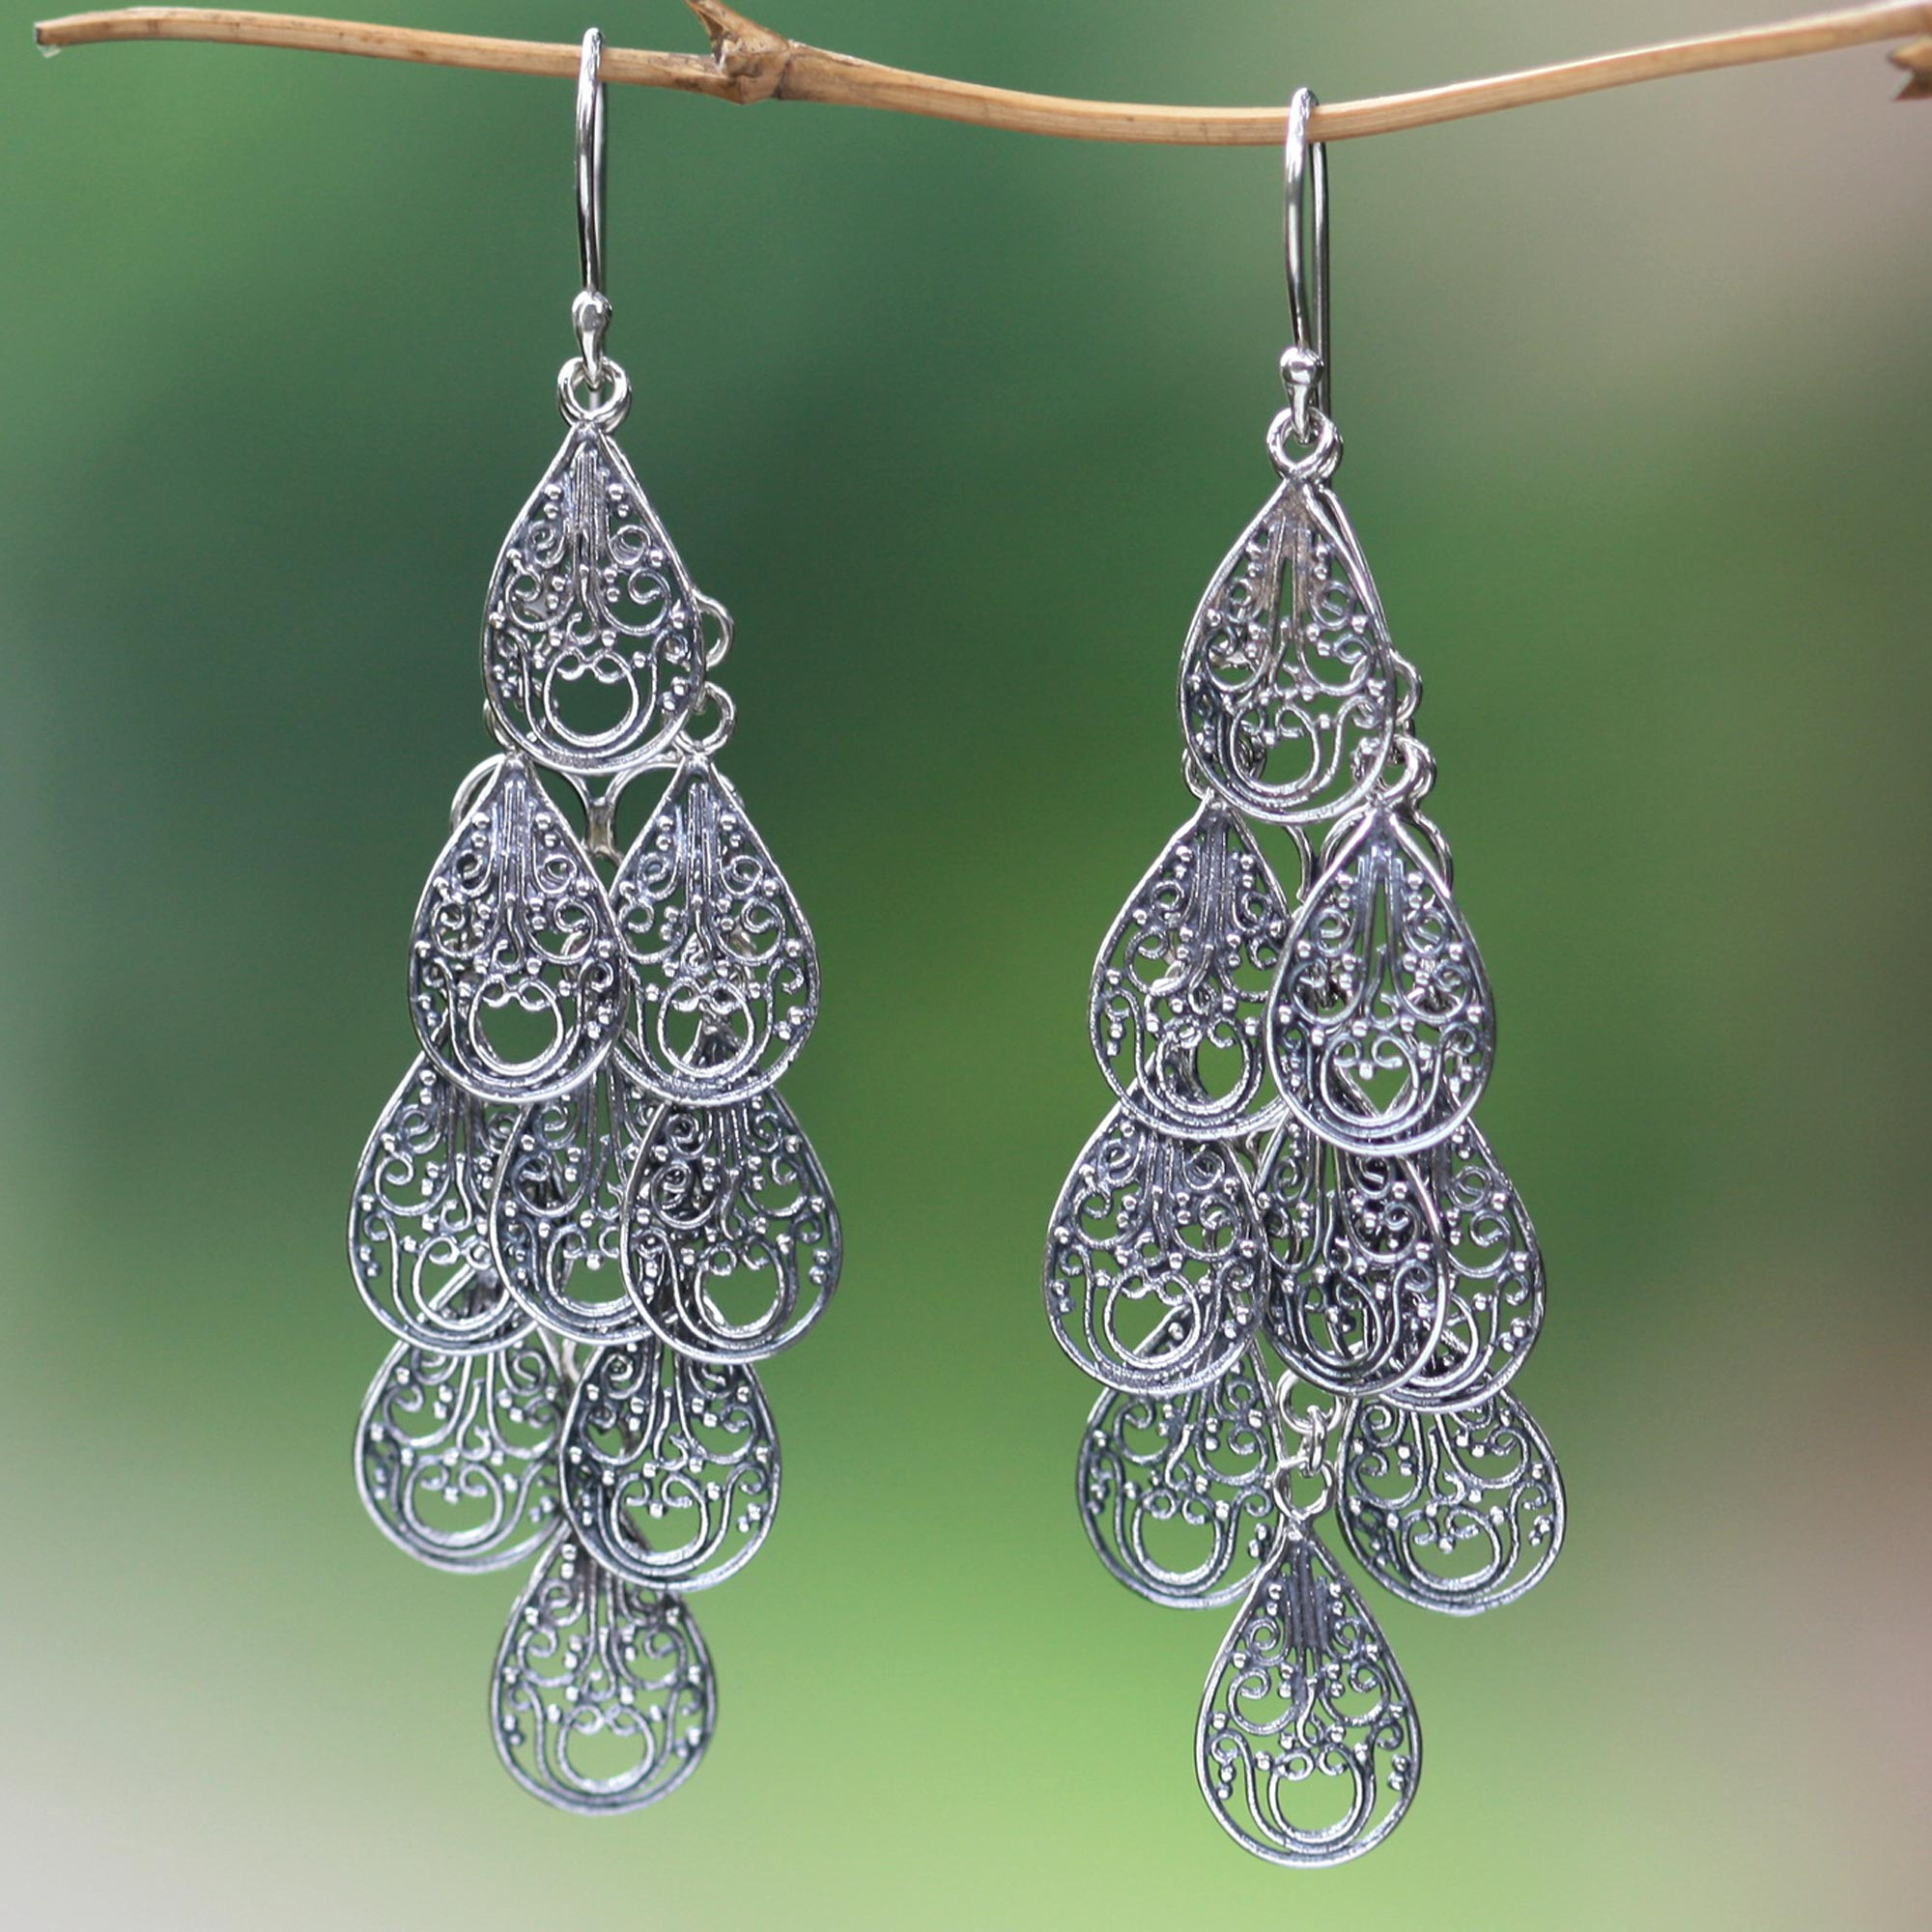 GIVA 925 Sterling Silver Filigree Earrings| Valentine's Gift for  Girlfriend, Gifts for Sister, Gifts for Women & Girls | With Certificate of  Authenticity and 925 Stamp | 6 Month Warranty* : Amazon.in: Jewellery